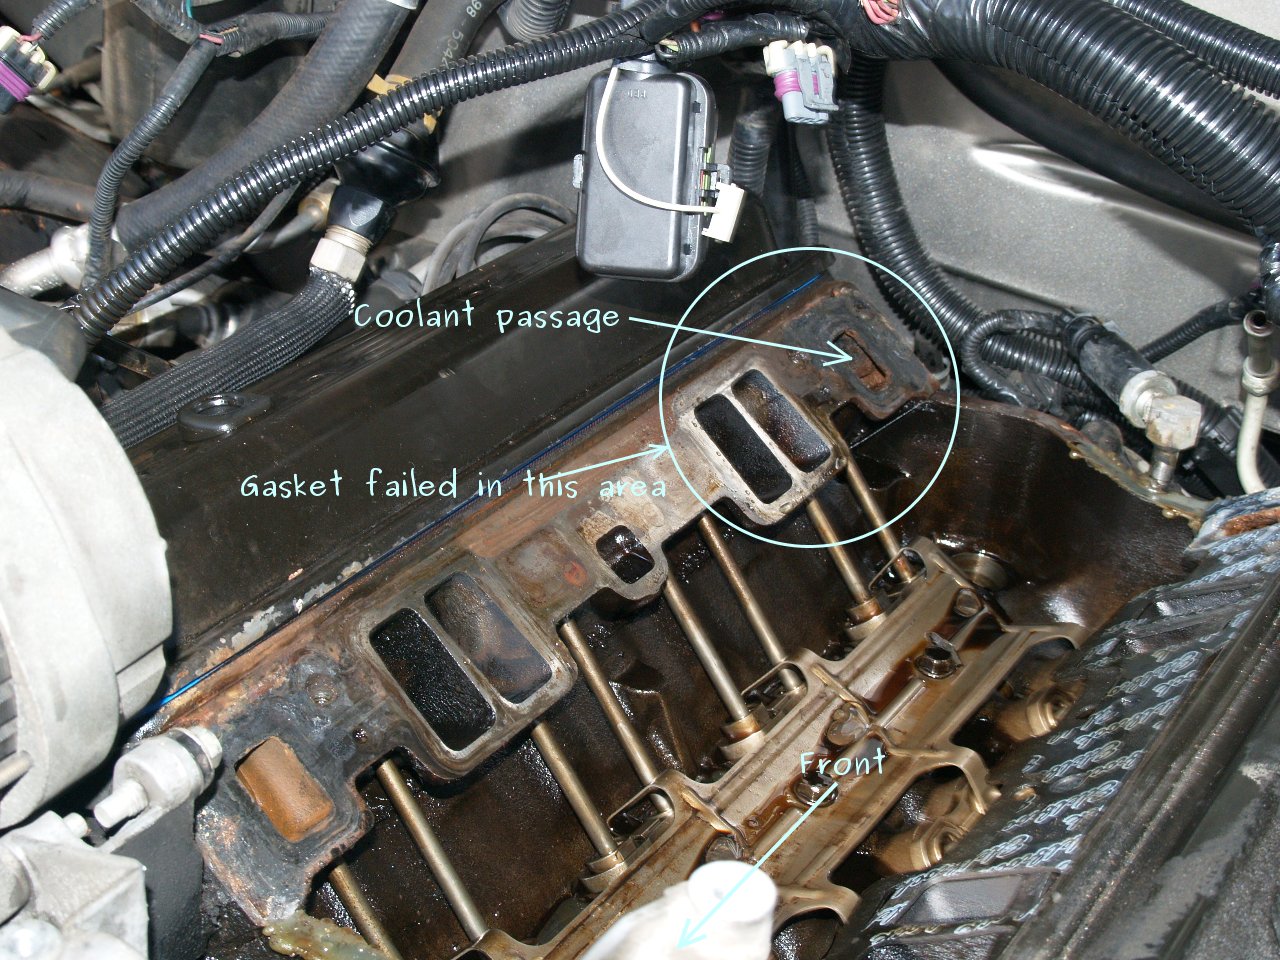 See P0921 in engine